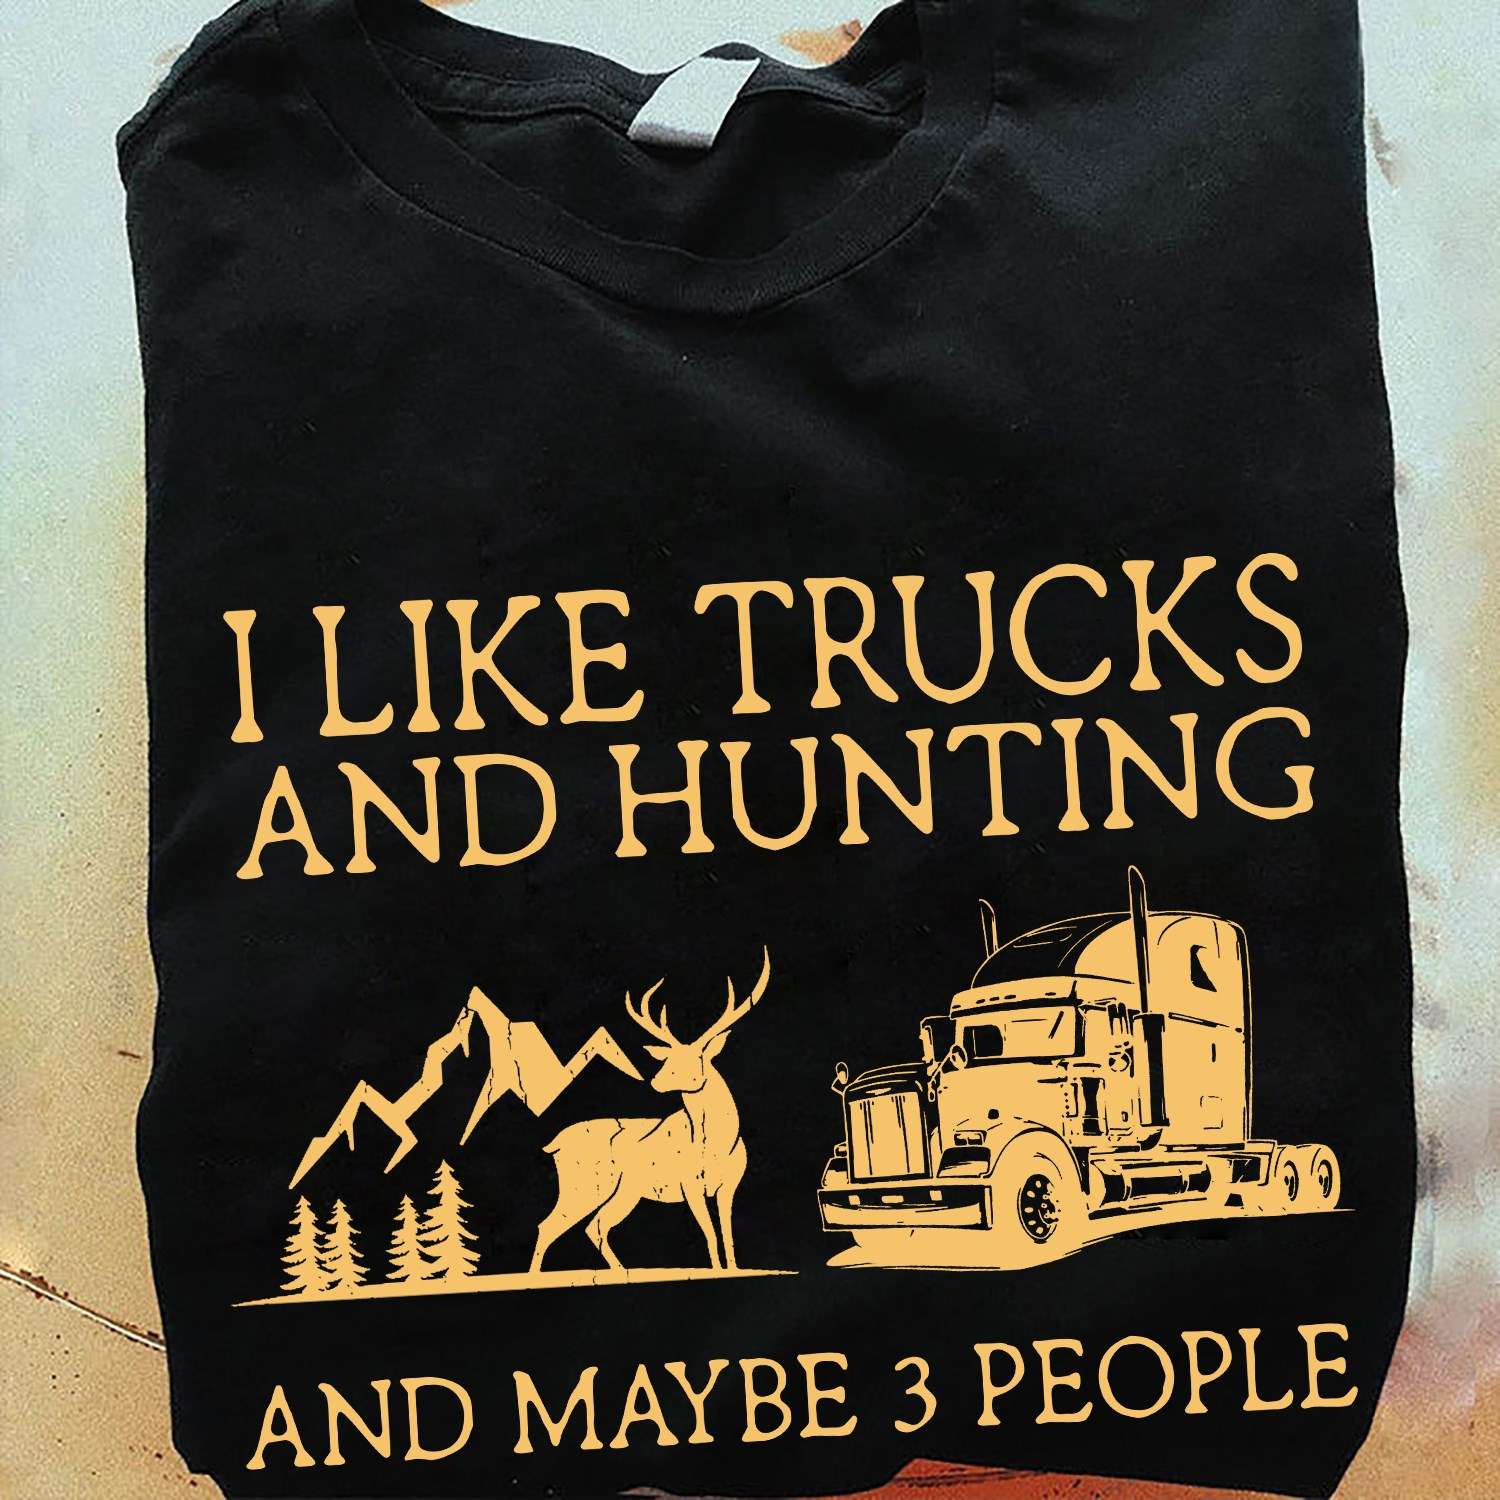 I like trucks and hunting and maybe 3 people - Truck driver the job